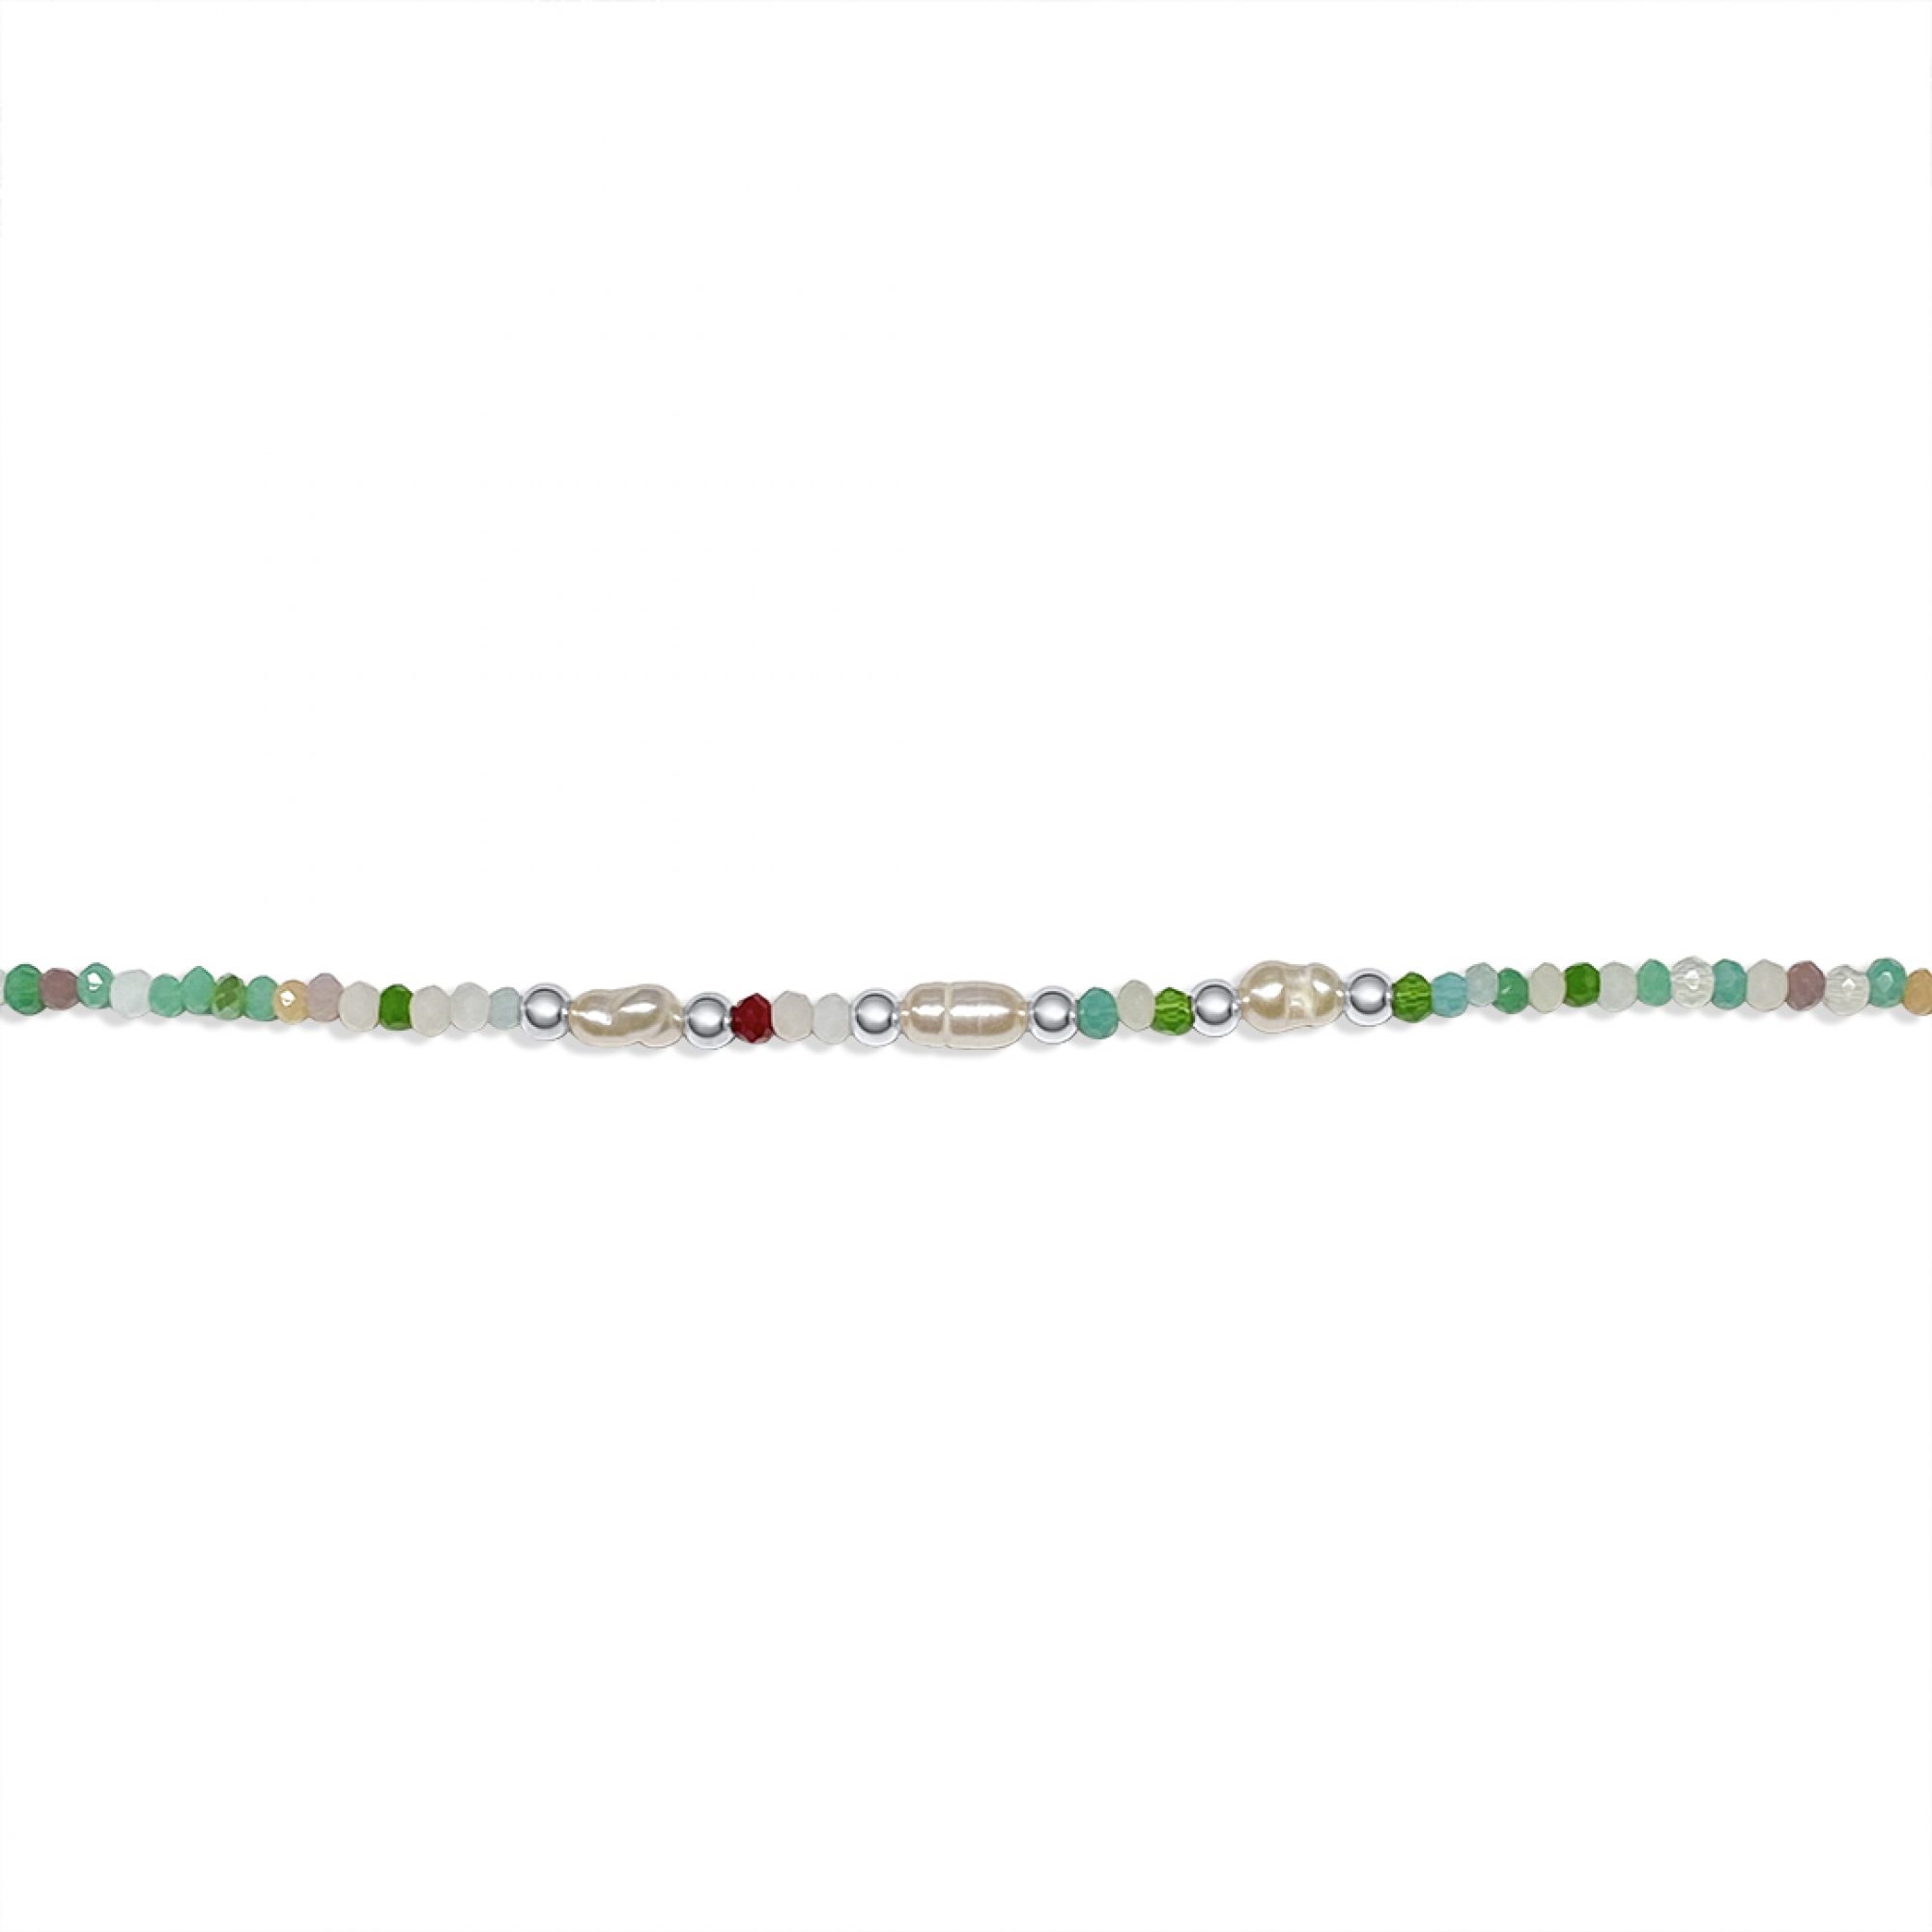 Anklet with multicoloured beads